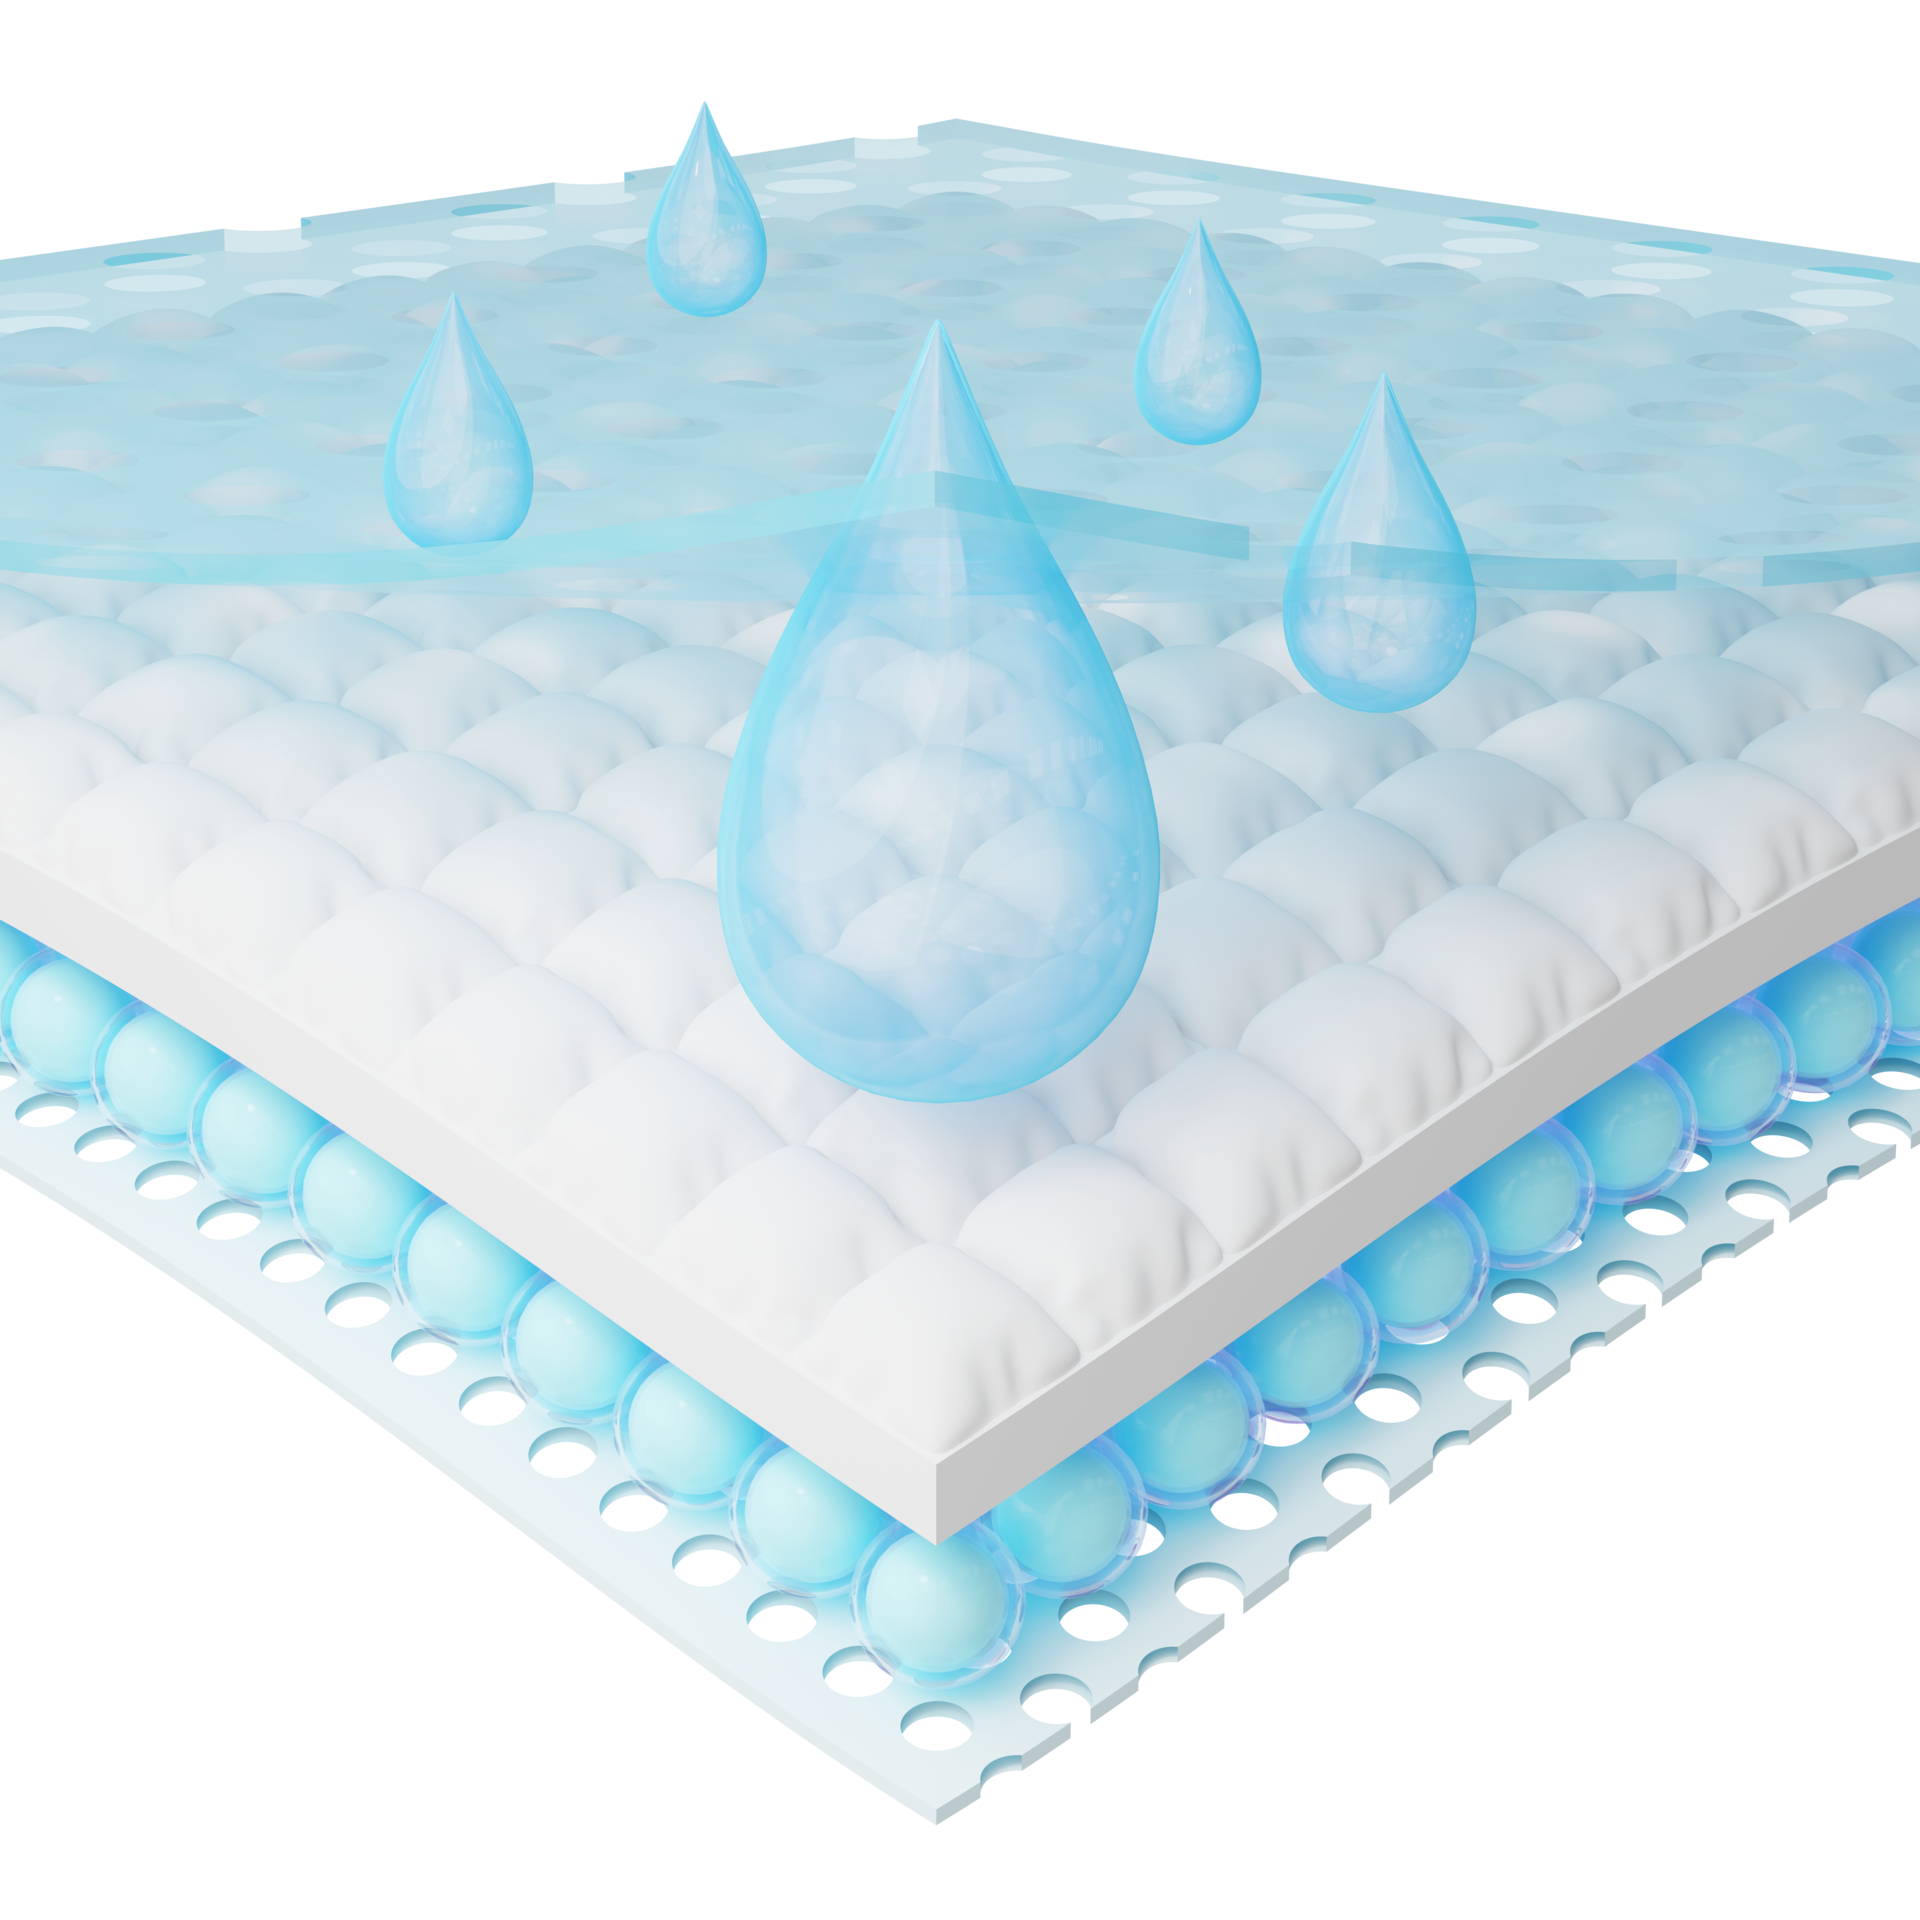 https://static.vecteezy.com/system/resources/previews/024/075/860/original/close-up-of-blue-water-drop-fall-onto-absorbent-pad-3d-moisture-absorbing-fiber-sheets-with-4-sections-odor-materials-for-baby-adult-diapers-sanitary-pad-absorbing-cloth-advertising-3d-render-png.png